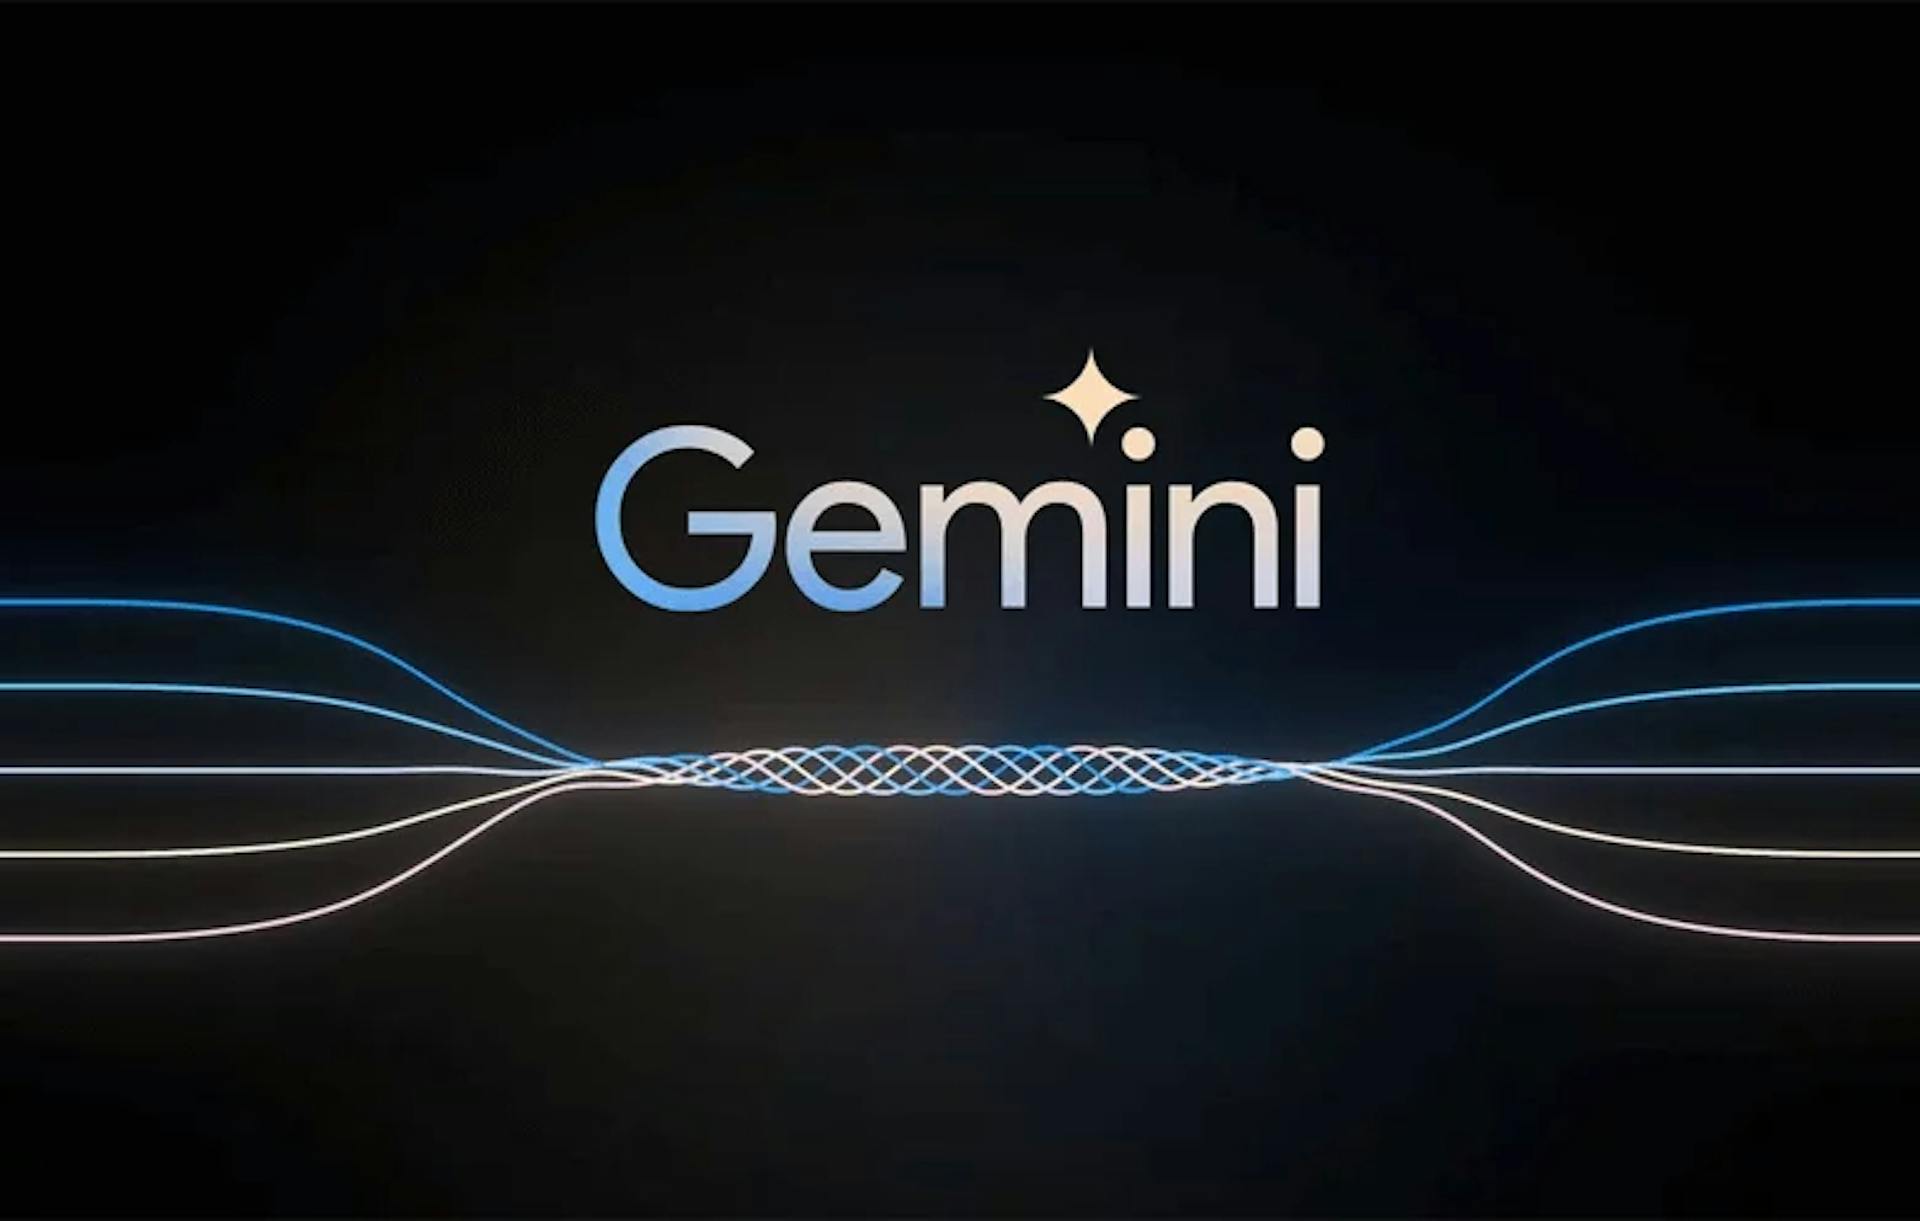 featured image - Gemini AI by Google: Characteristics, Applications, and Industrial Influence